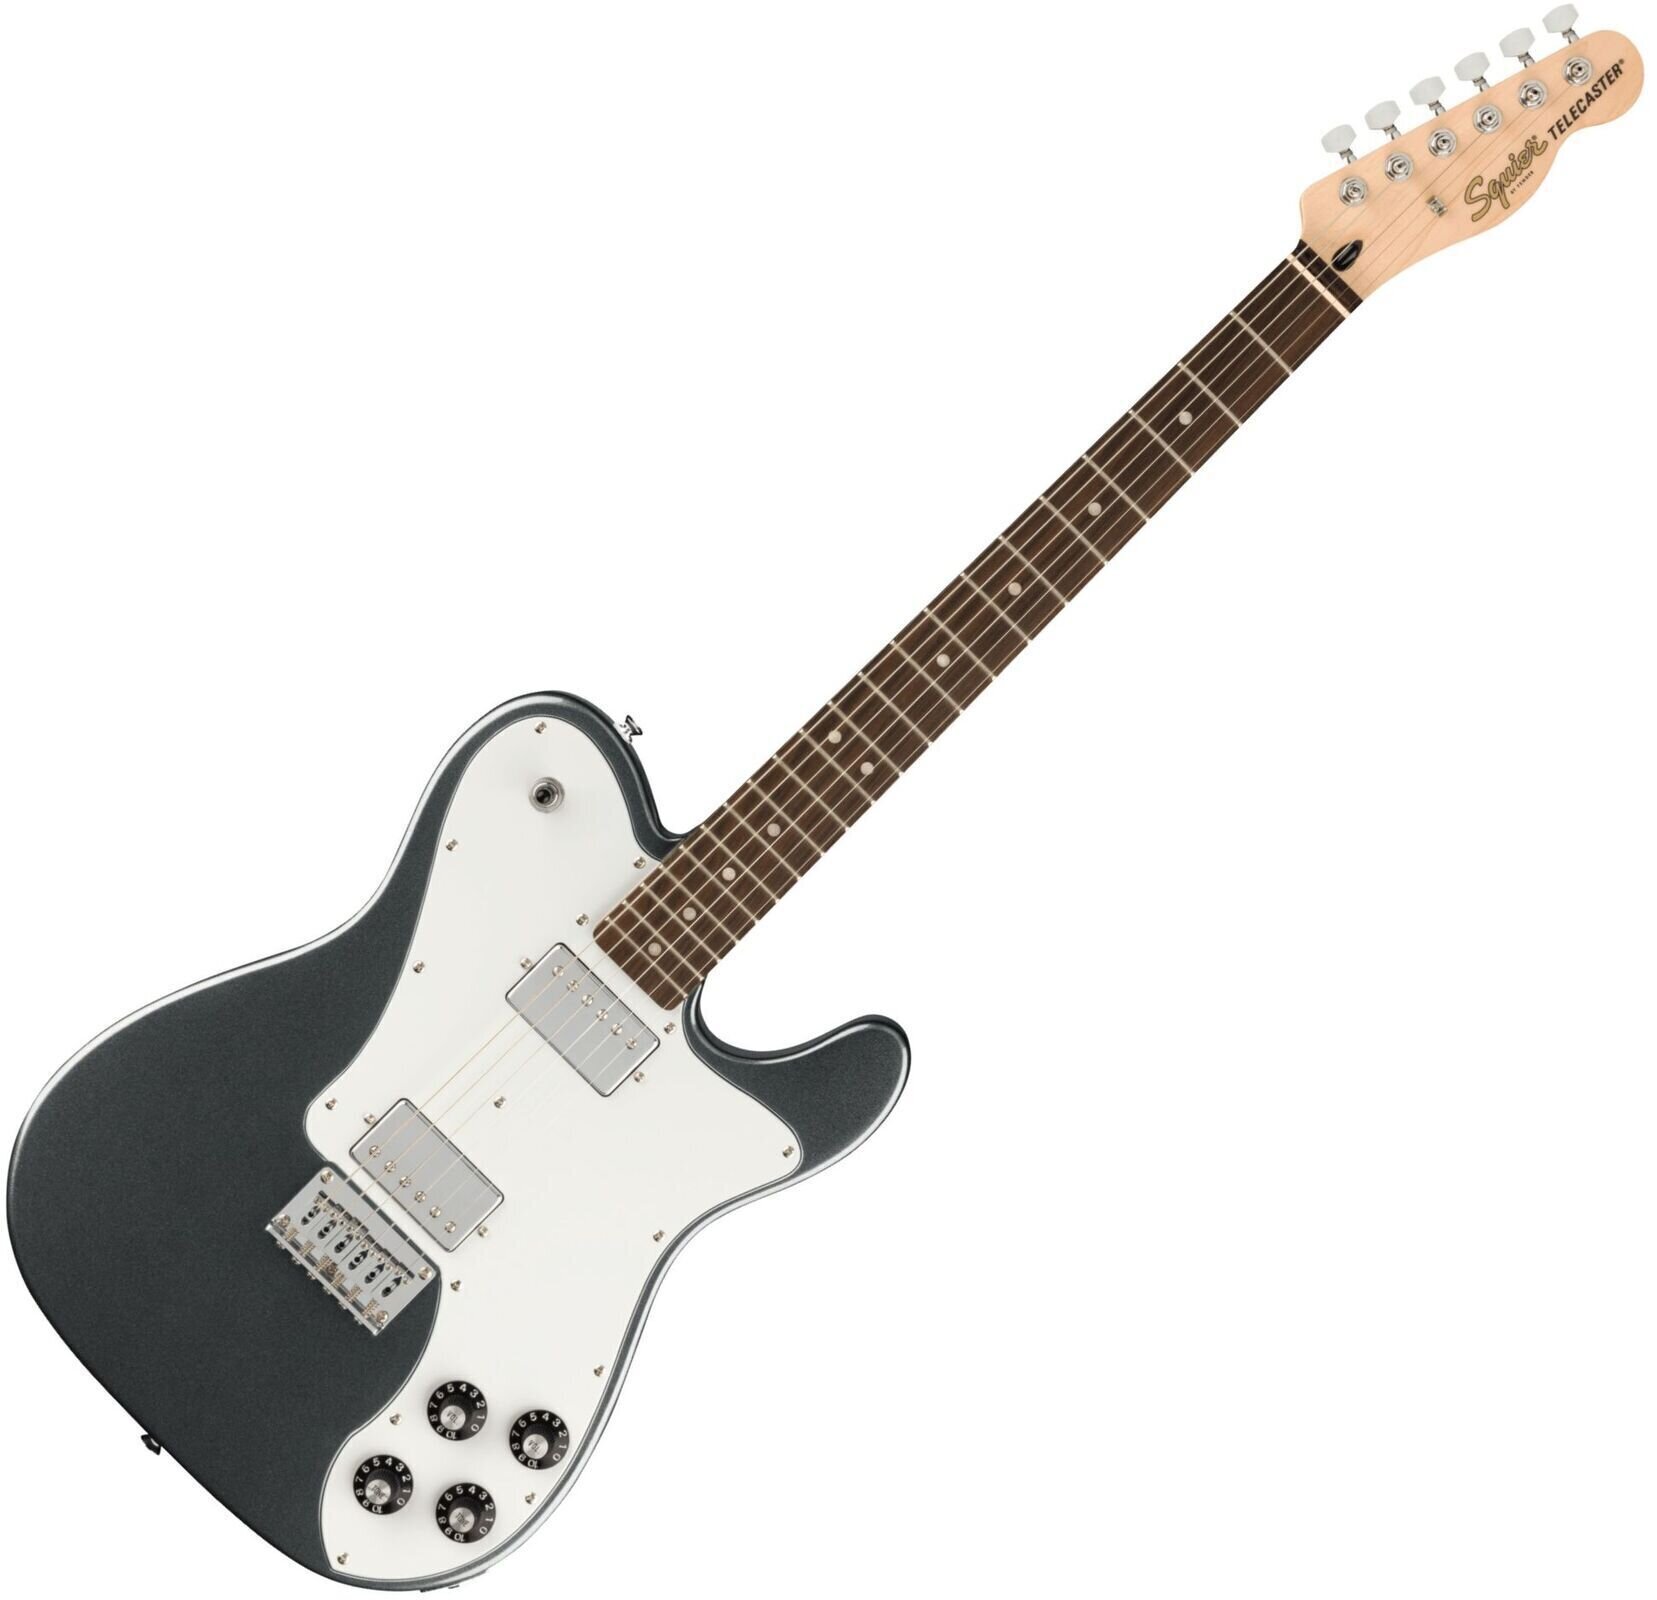 E-Gitarre Fender Squier Affinity Series Telecaster Deluxe Charcoal Frost Metallic